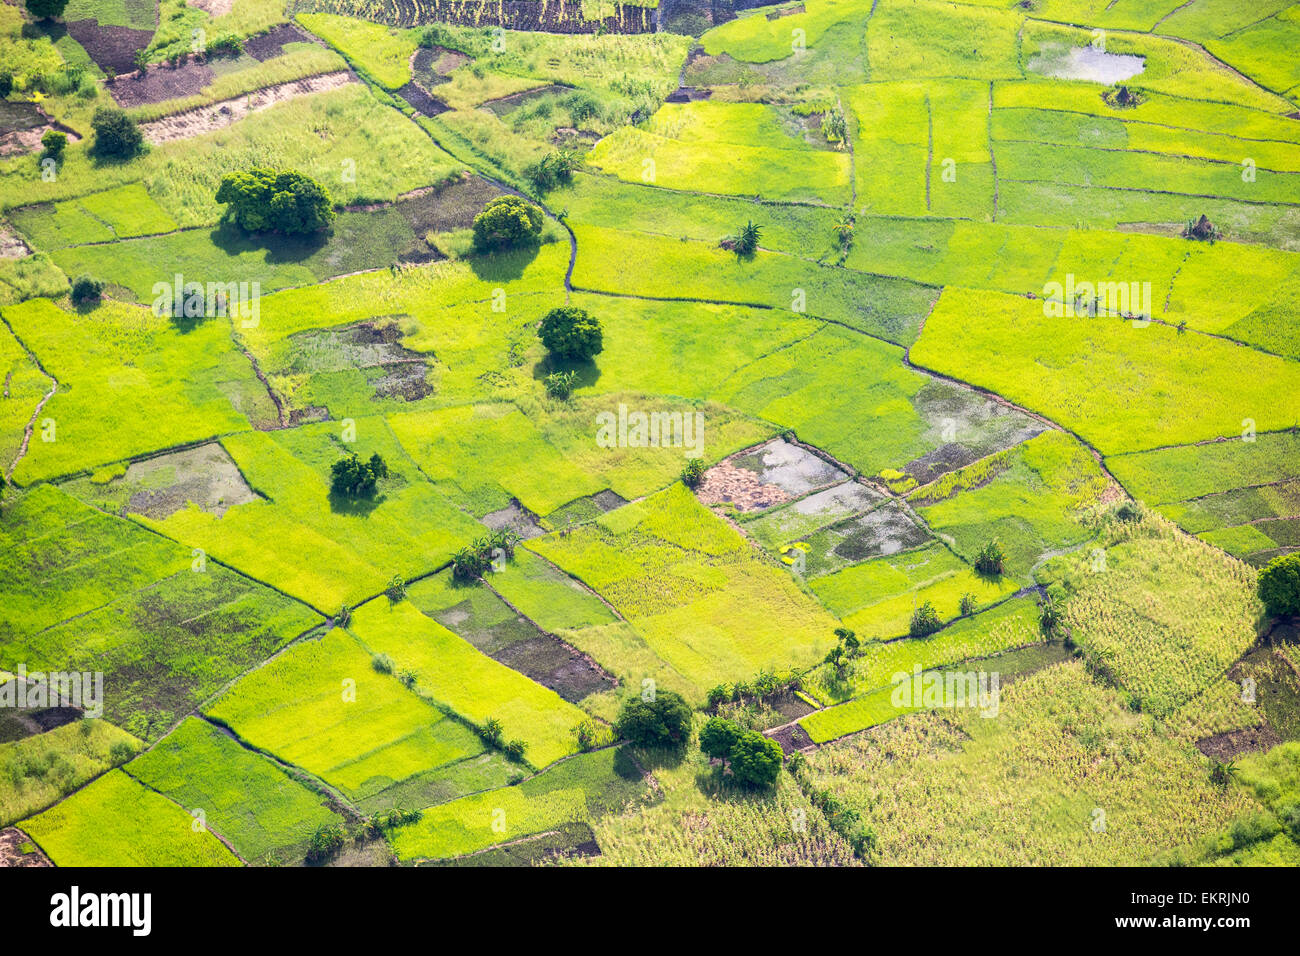 Looking down from the air onto rice paddies and Maize crops in the Shire Valley, Malawi, Africa. Stock Photo